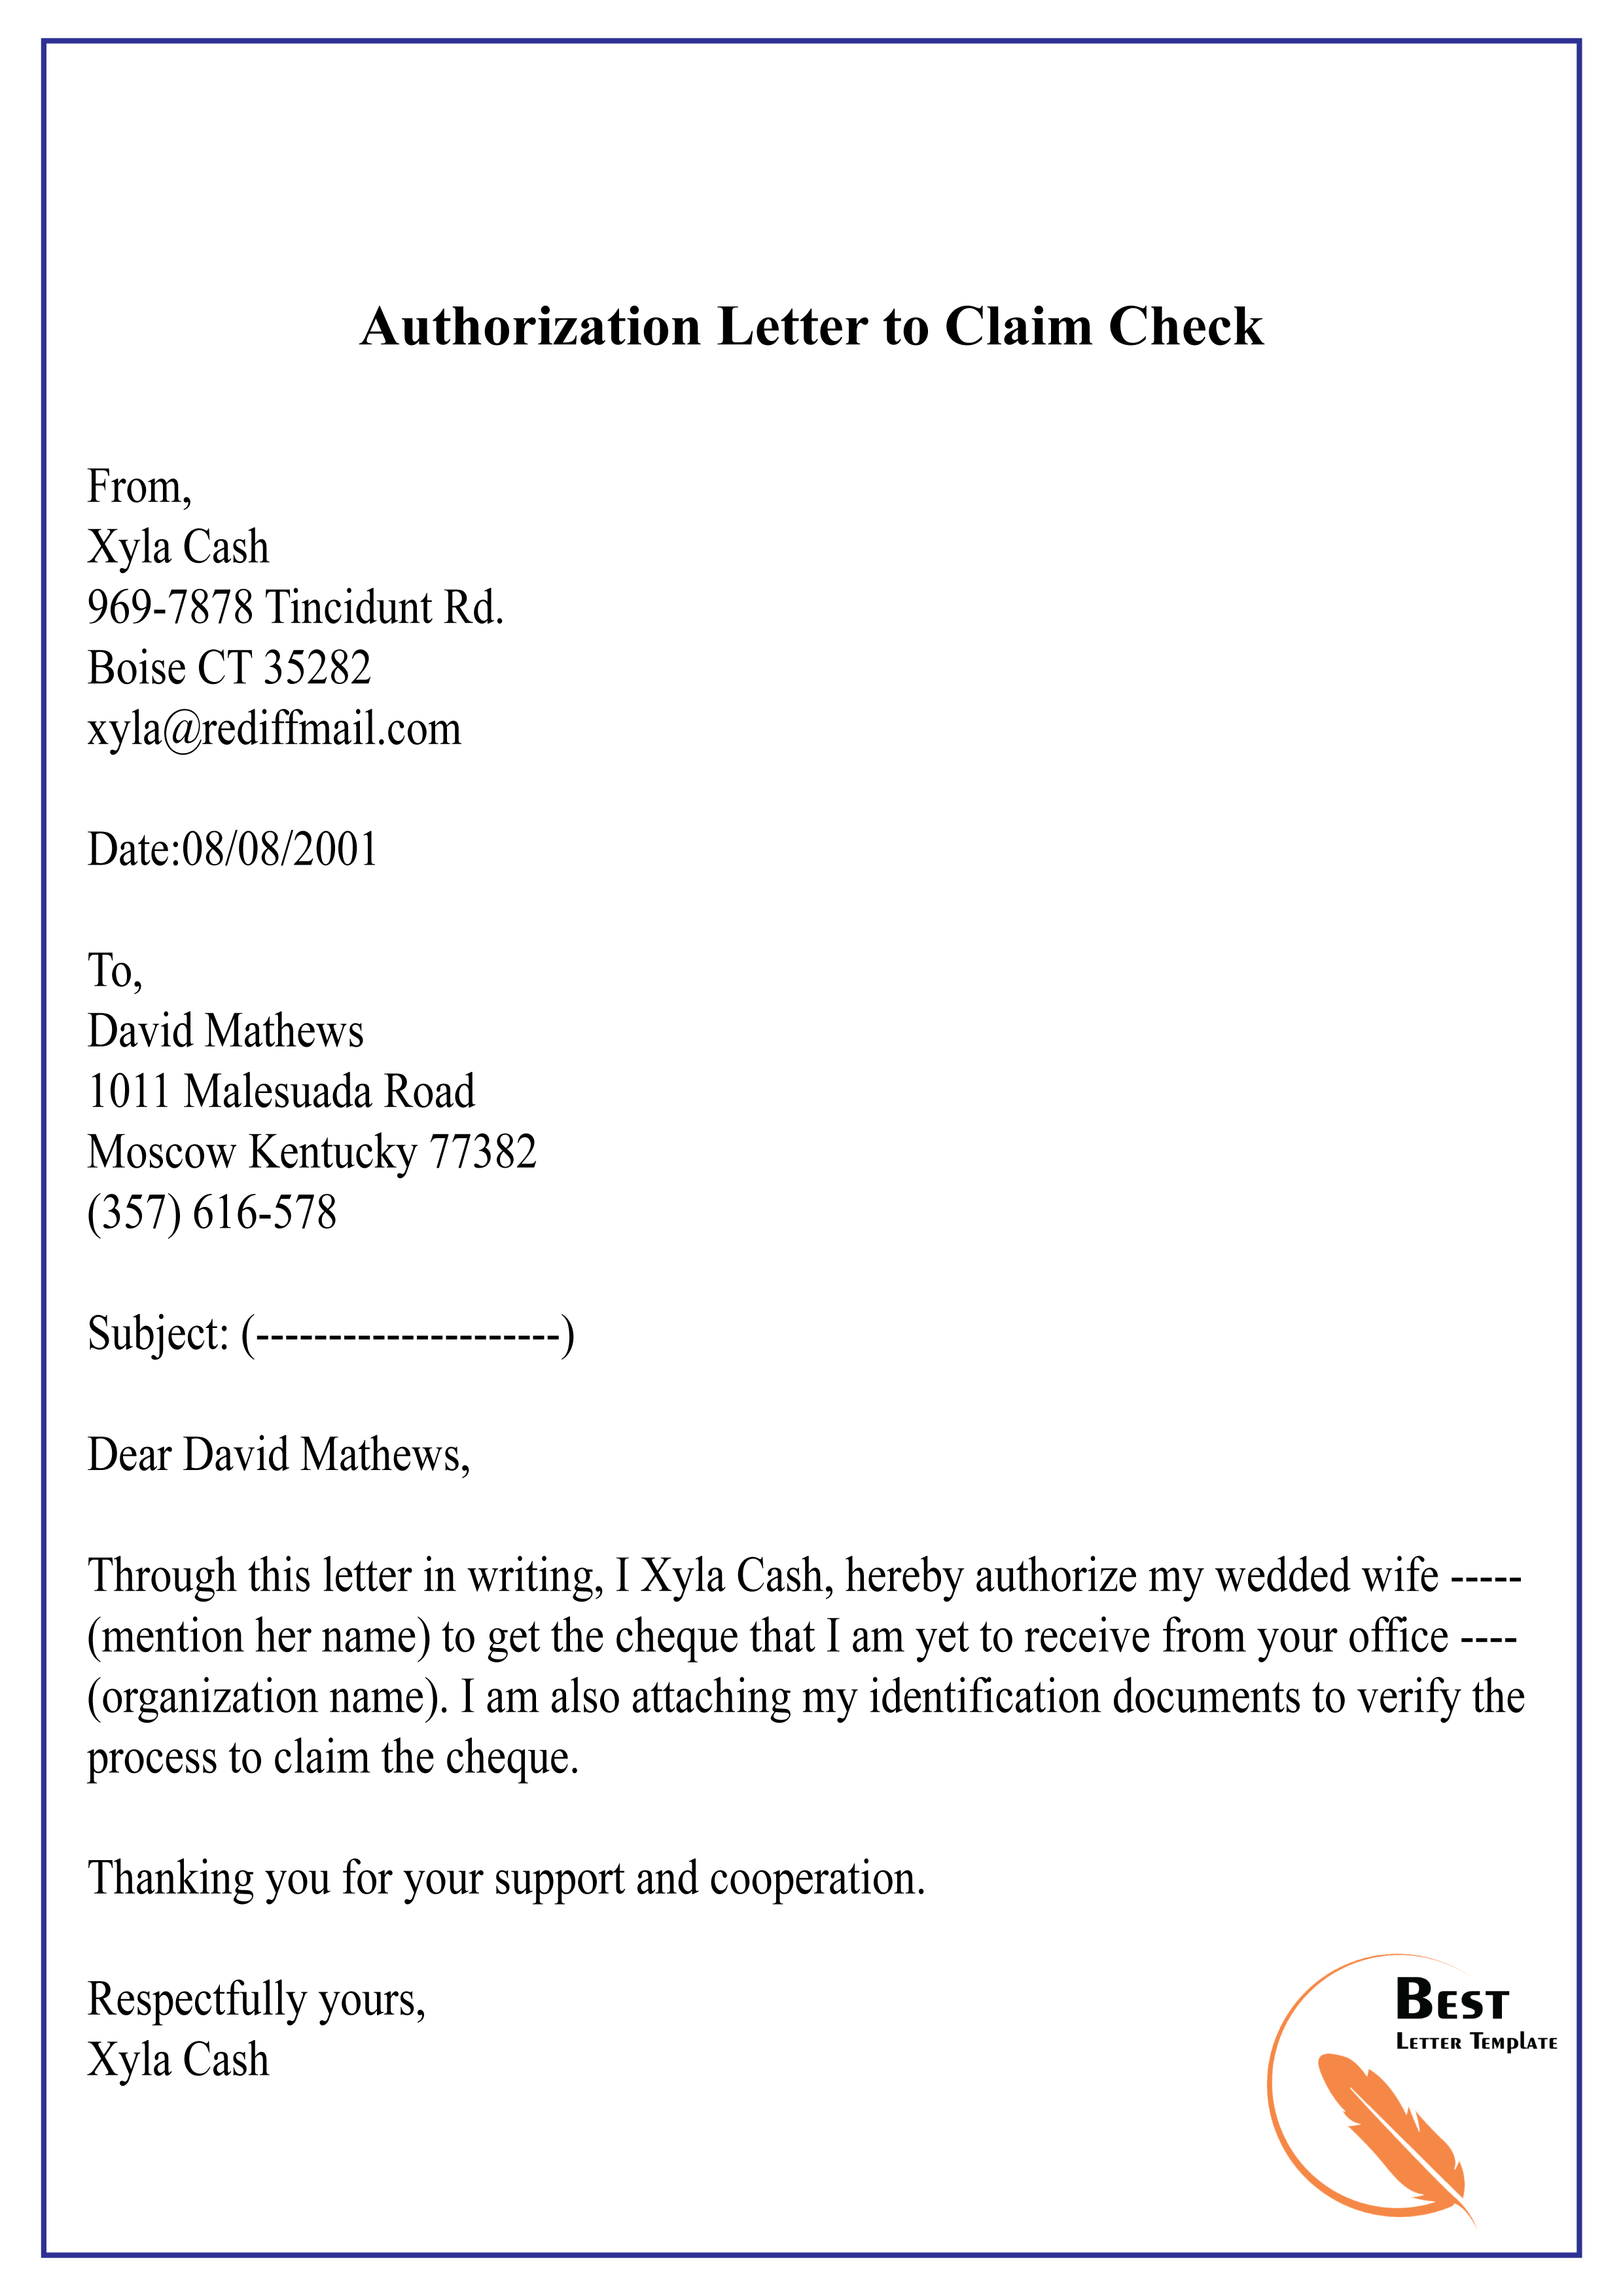 Sample Authorization Letter To Claim Check